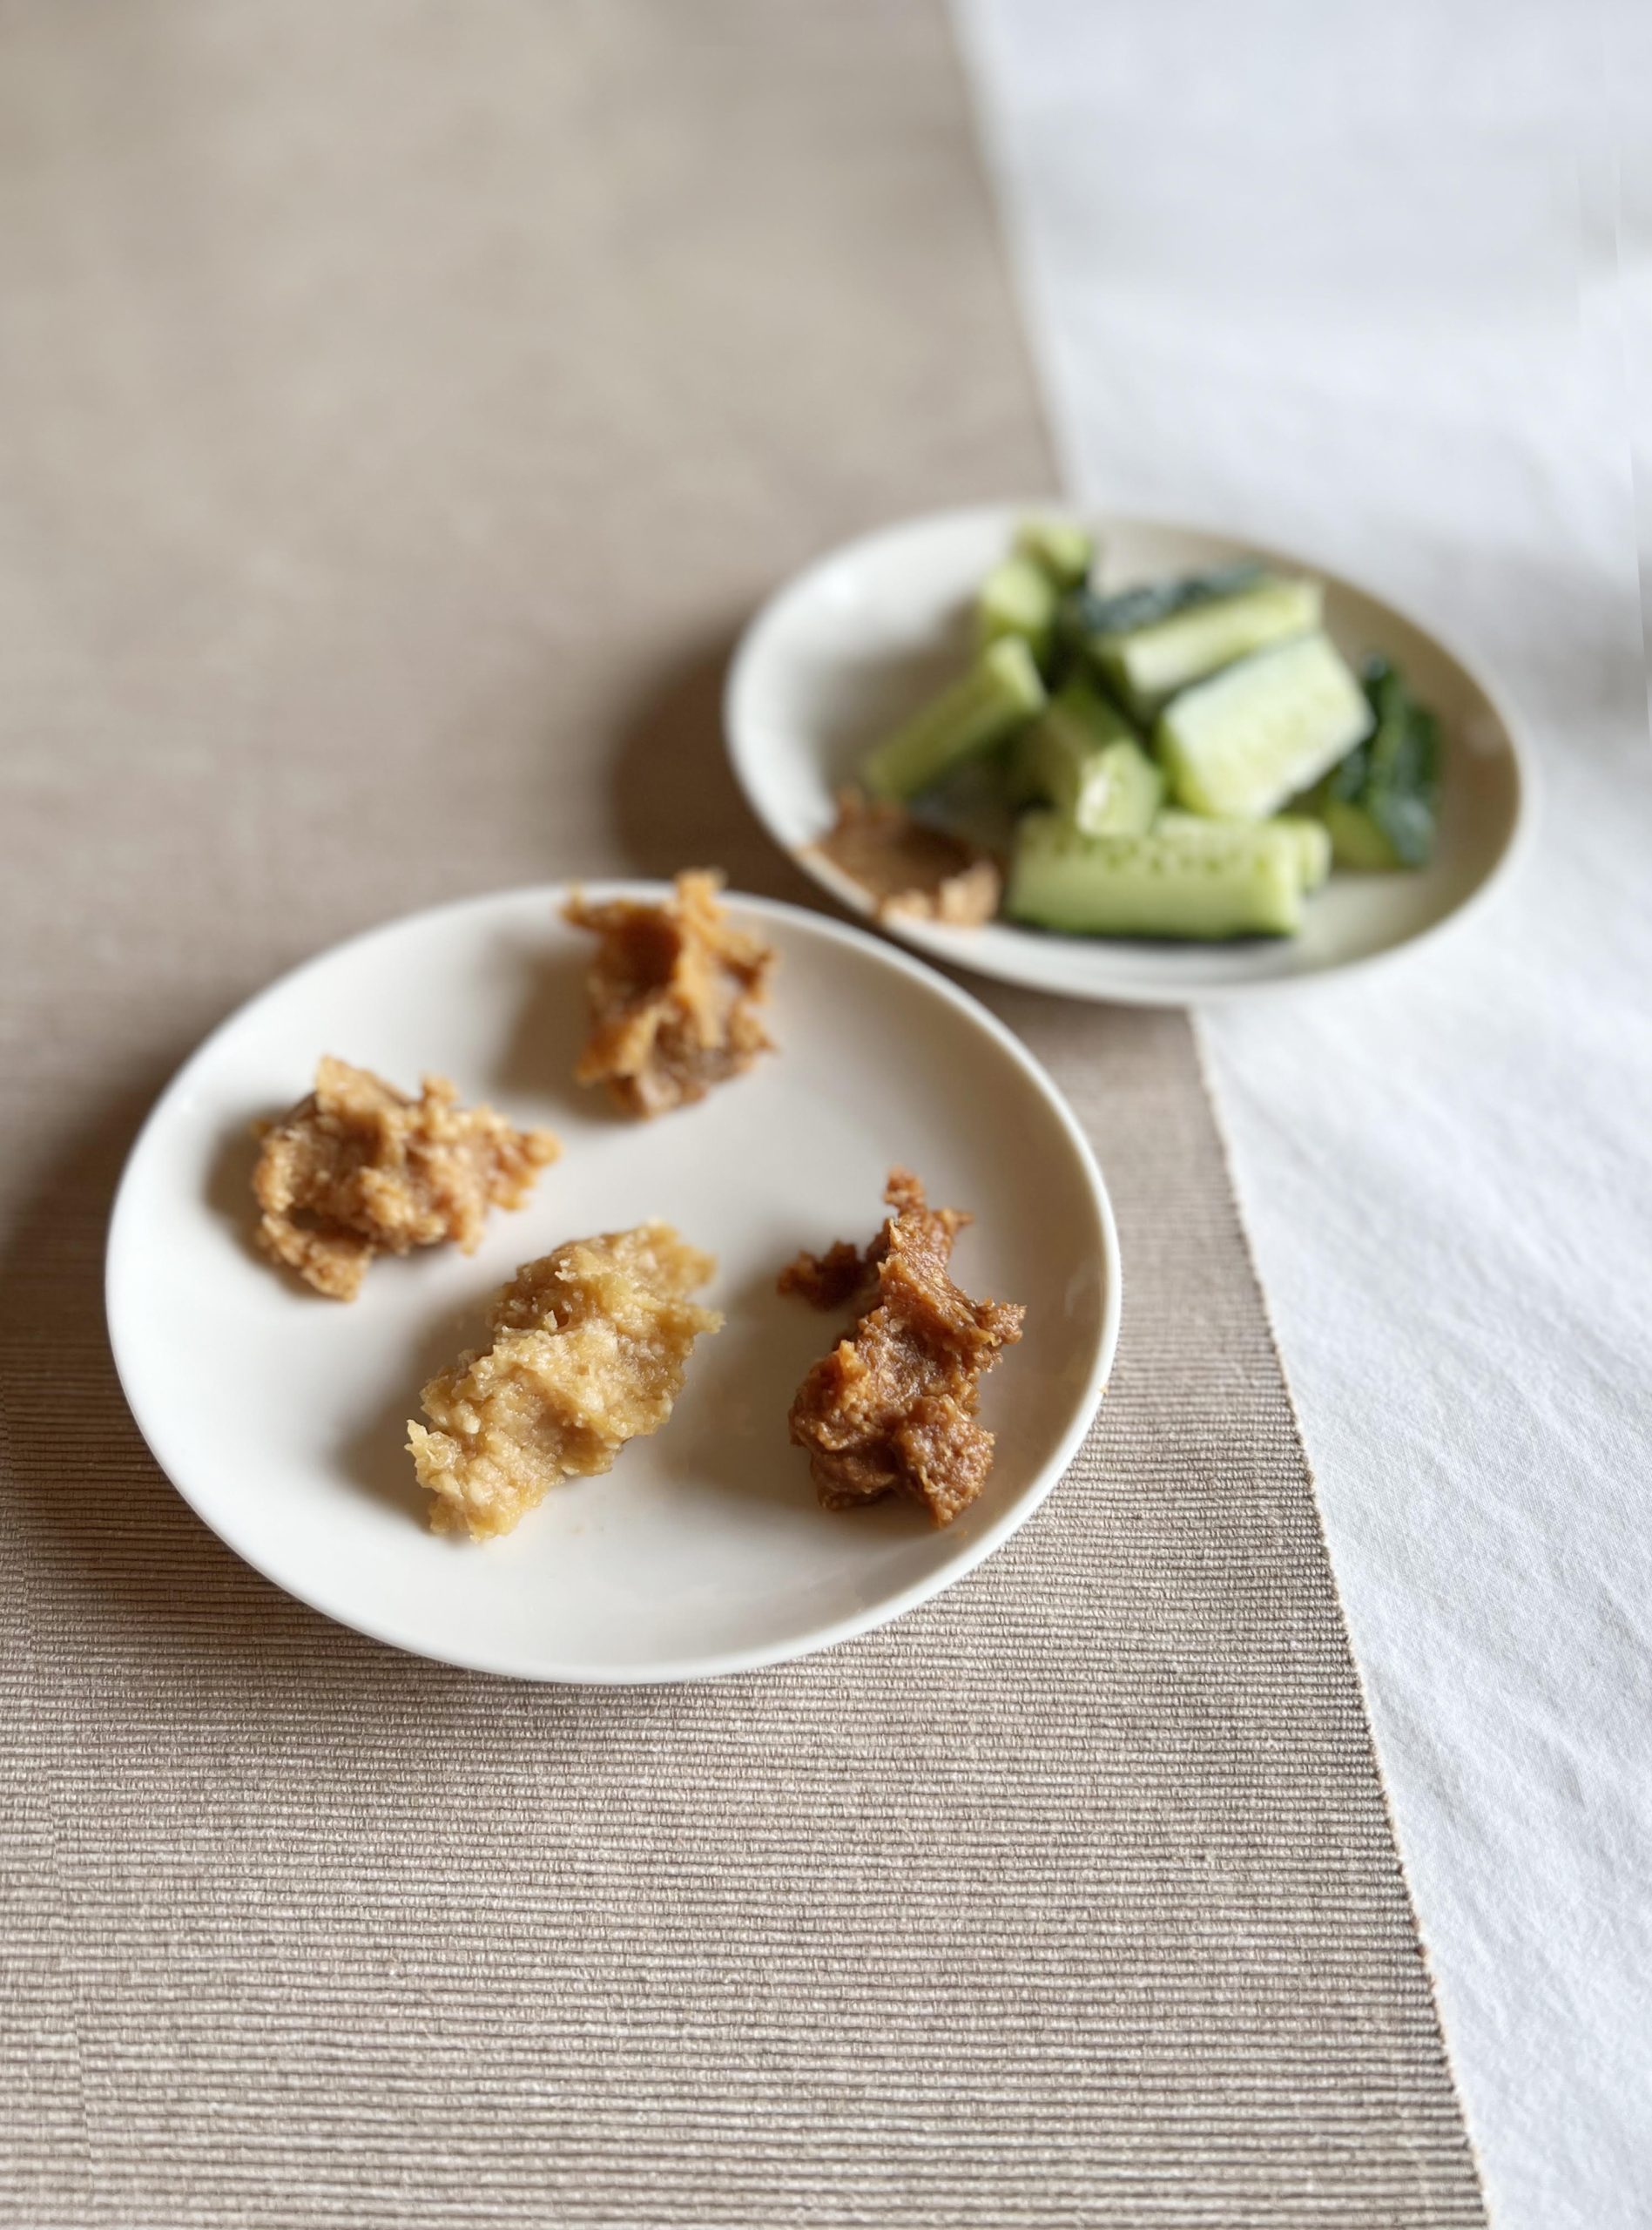 Their main products, white and red miso; and barley and chickpea miso
Photography Junko Kitano